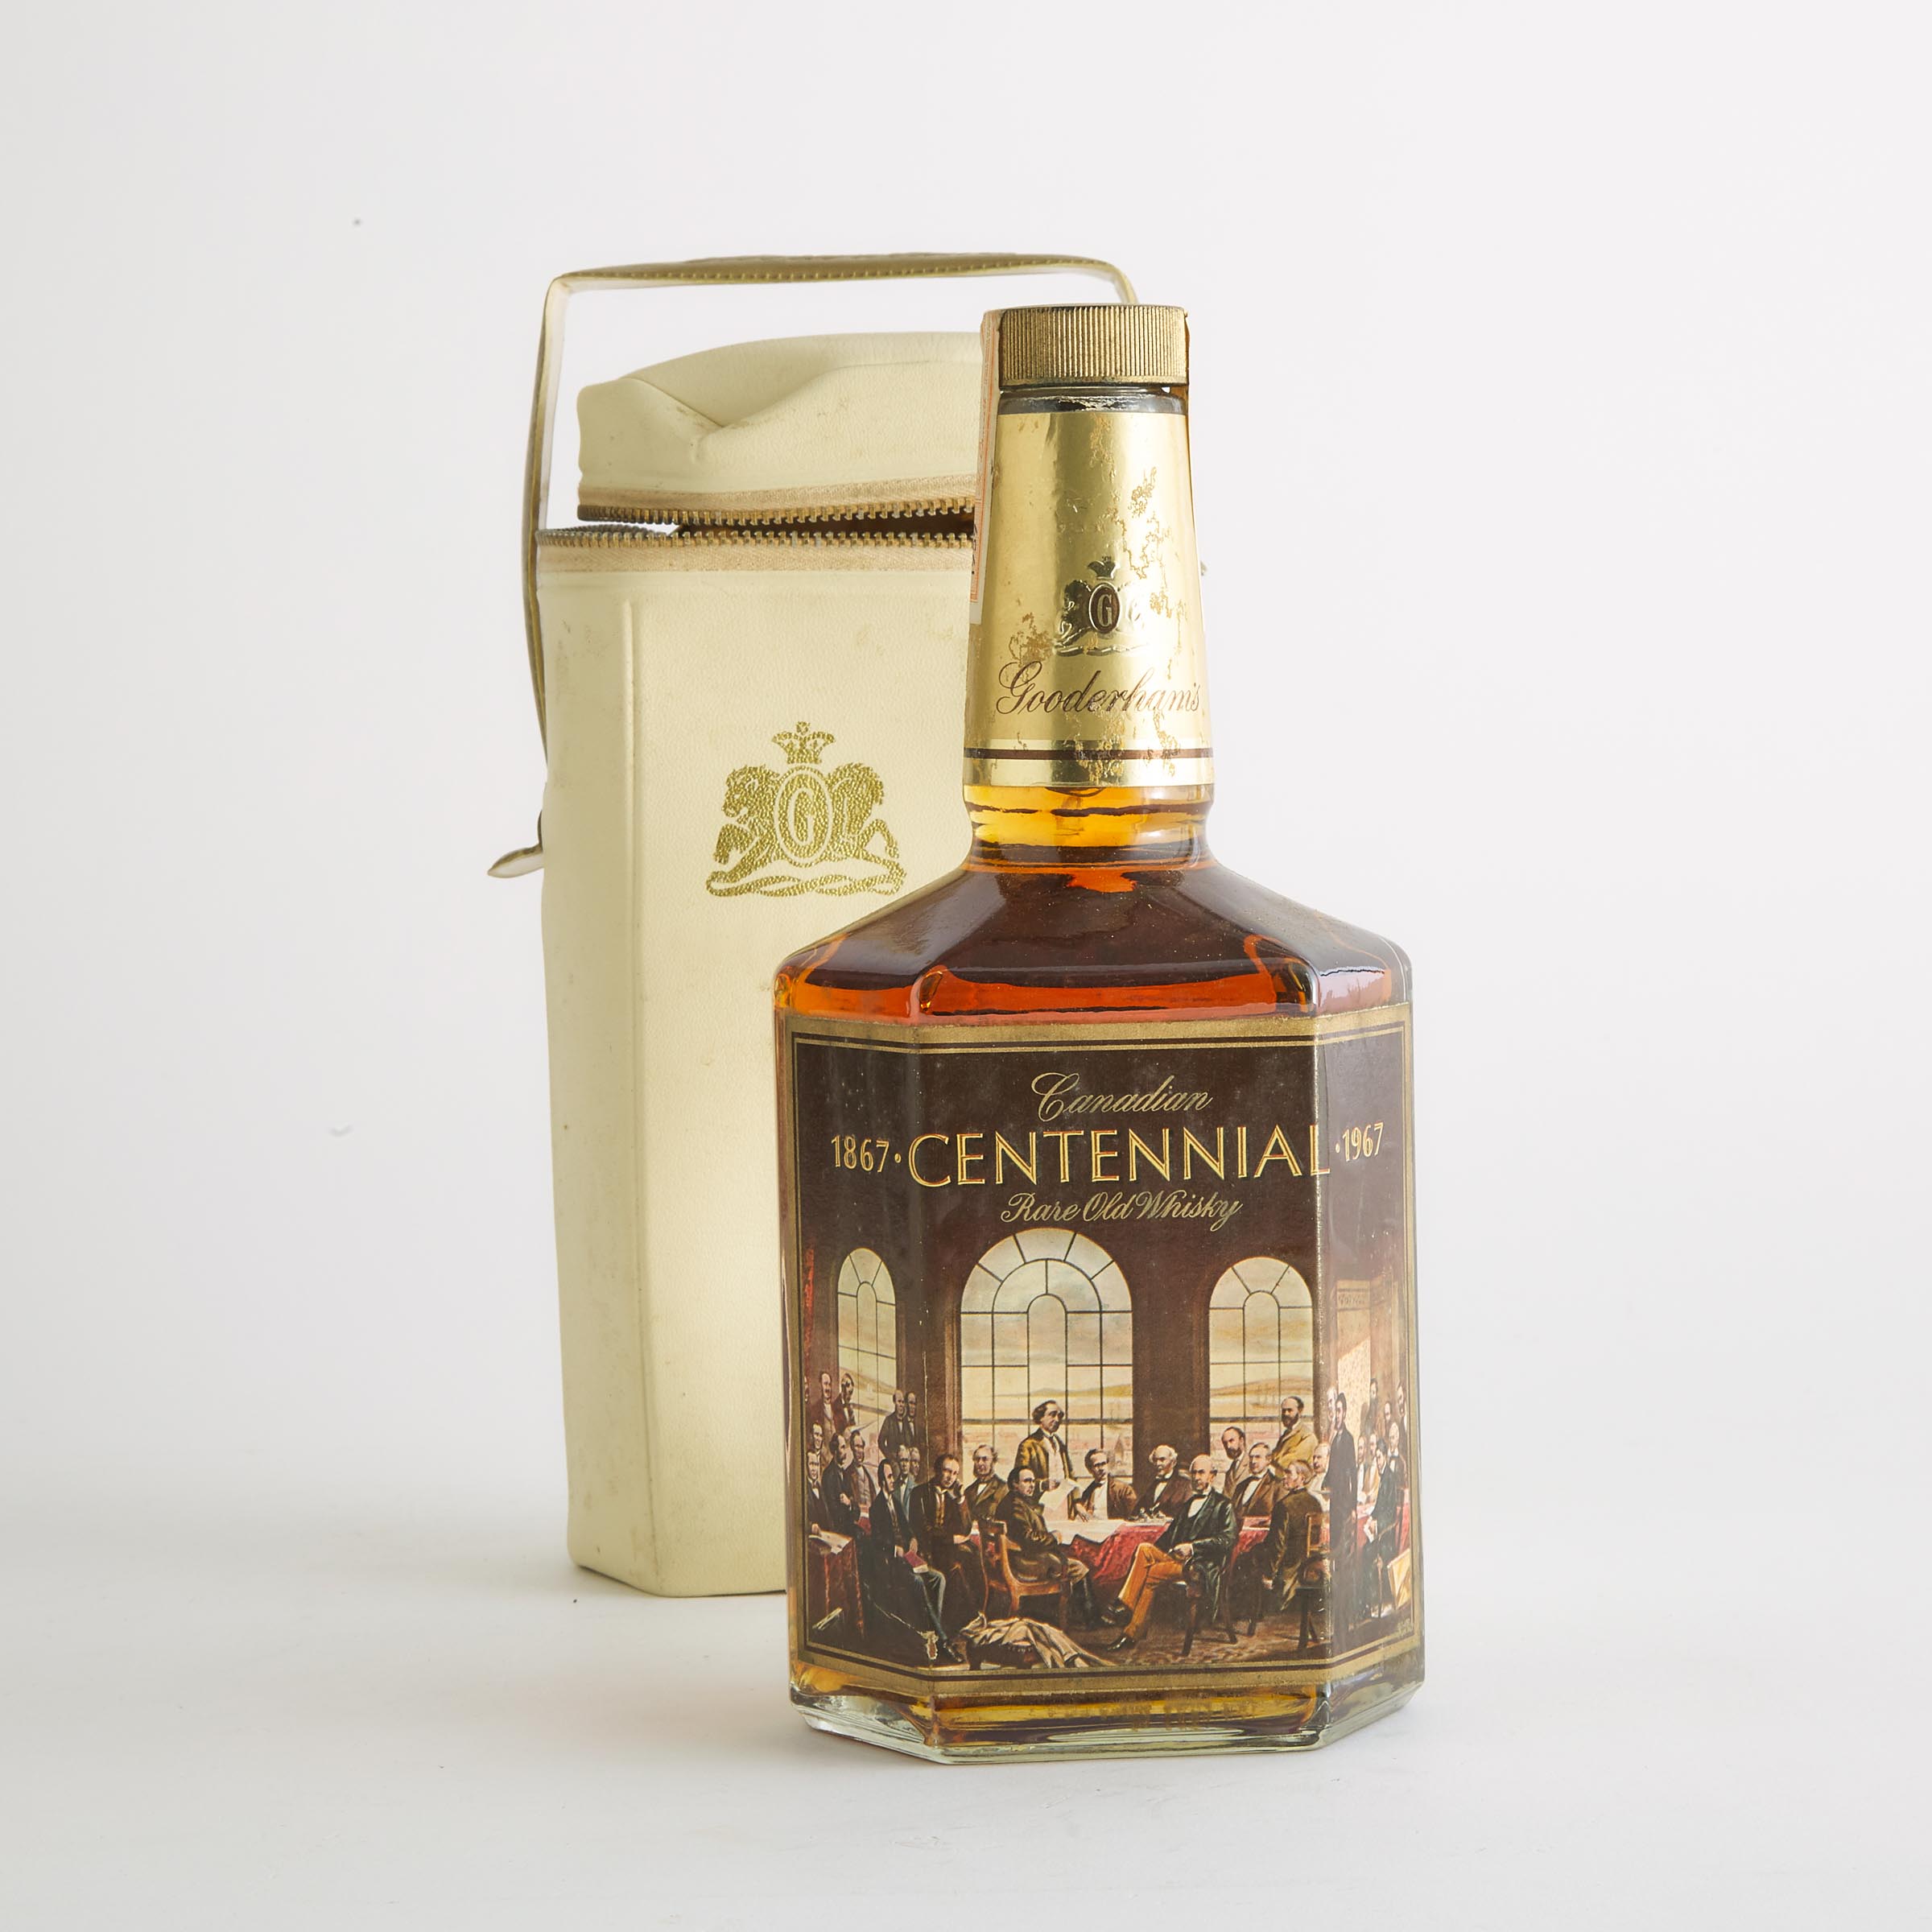 GOODERHAM’S CANADIAN CENTENNIAL RARE OLD WHISKY 15 YEARS (ONE 25 OZ.)